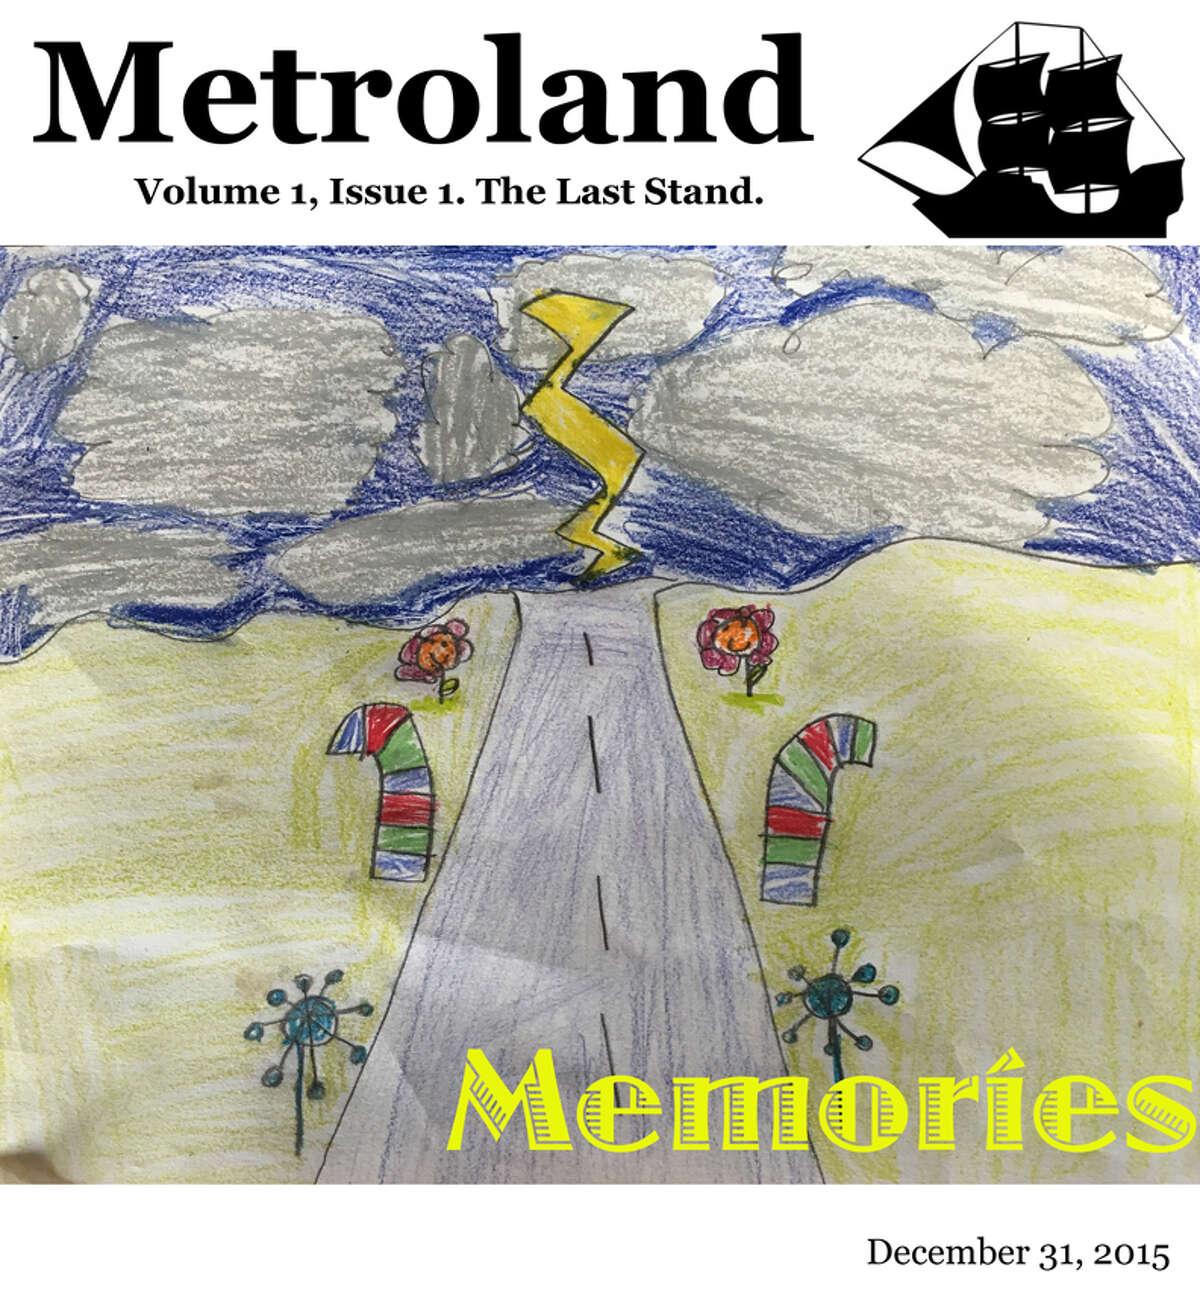 The guerrilla final issue of Metroland, "The Last Stand," was published online Dec. 31, 2015 by staffers who worked on it for free. (Drawing by Betsey Colligan, age 8)